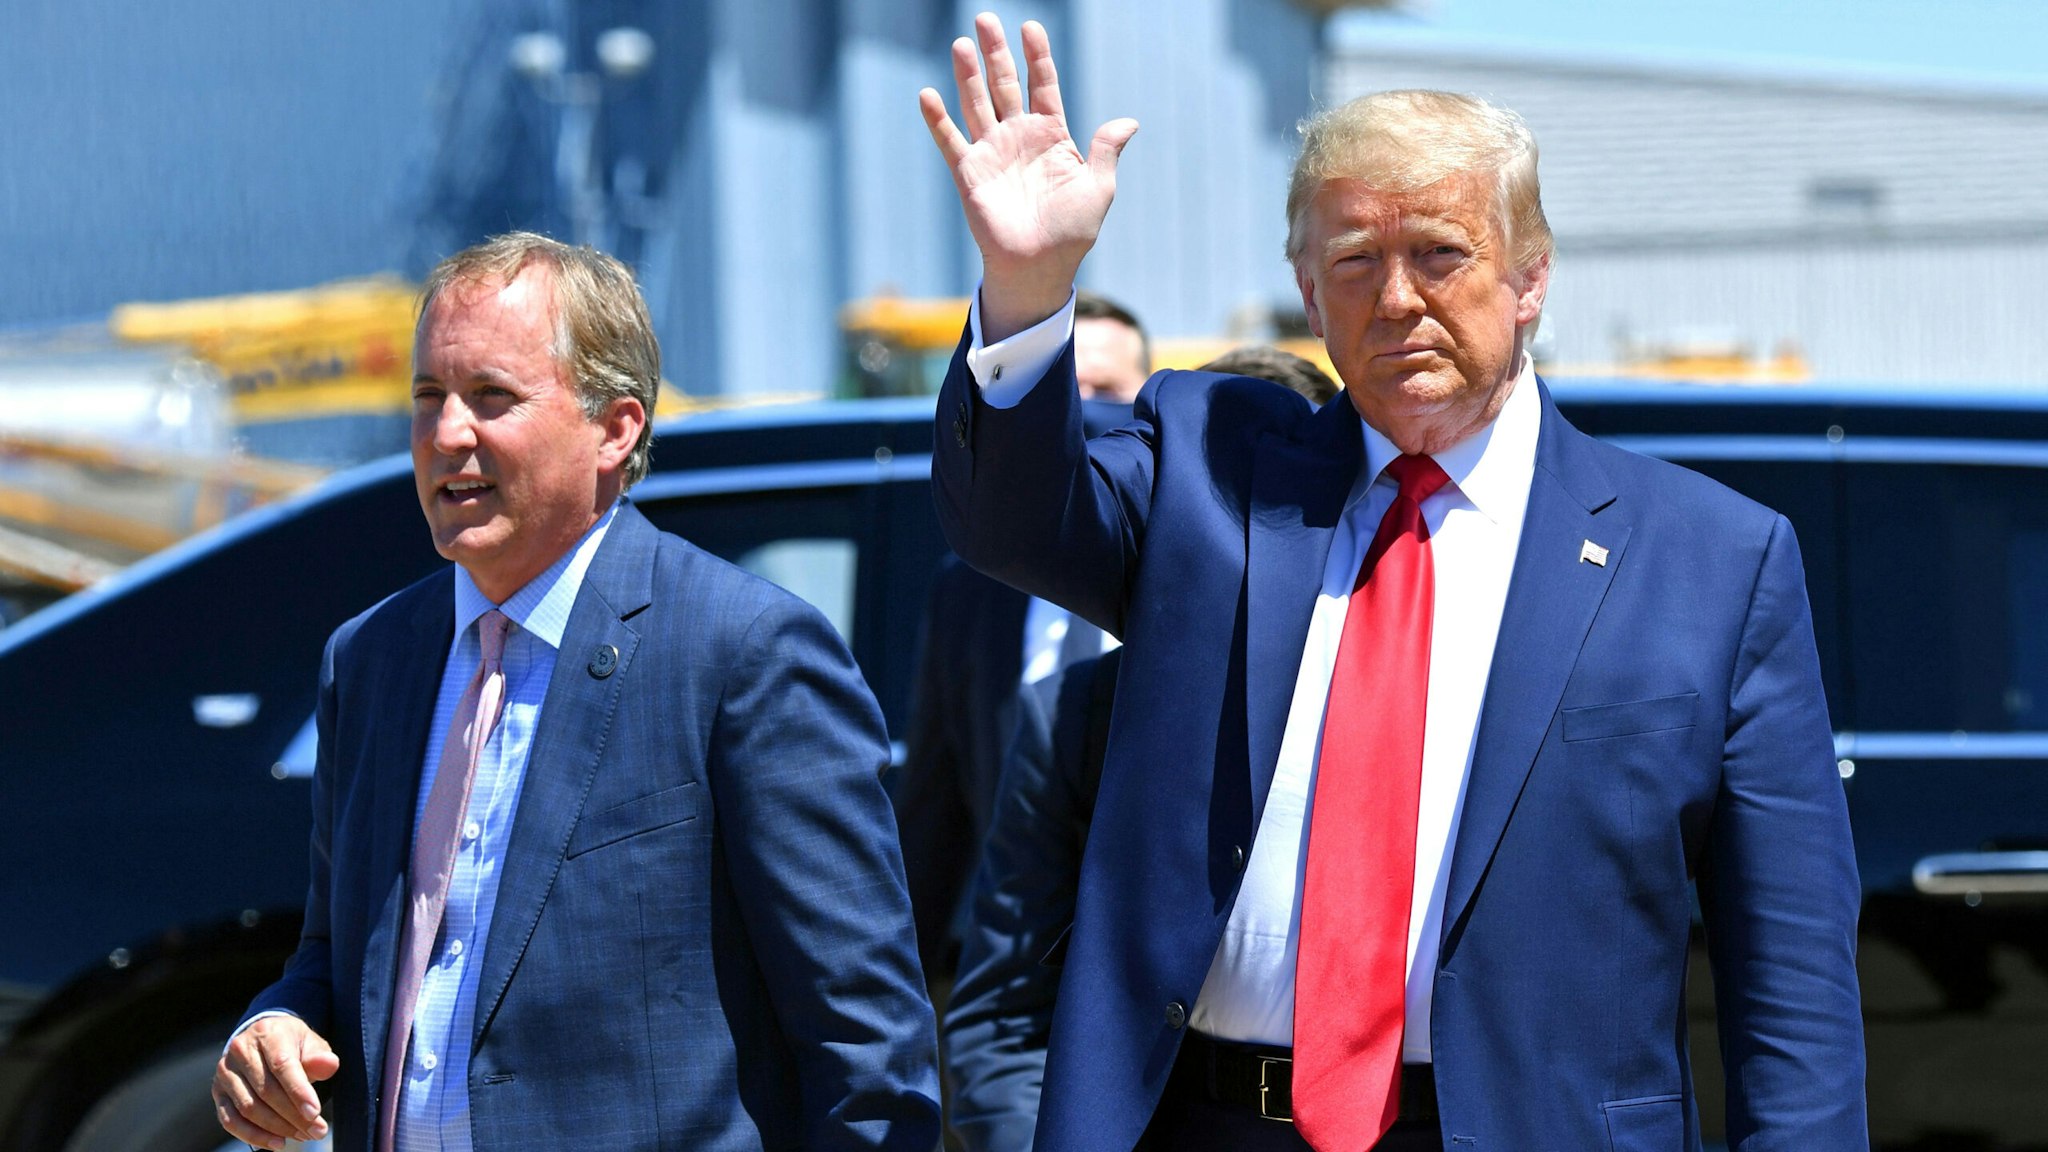 US President Donald Trump waves upon arrival, alongside Attorney General of Texas Ken Paxton (L) in Dallas, Texas, on June 11, 2020, where he will host a roundtable with faith leaders and small business owners.